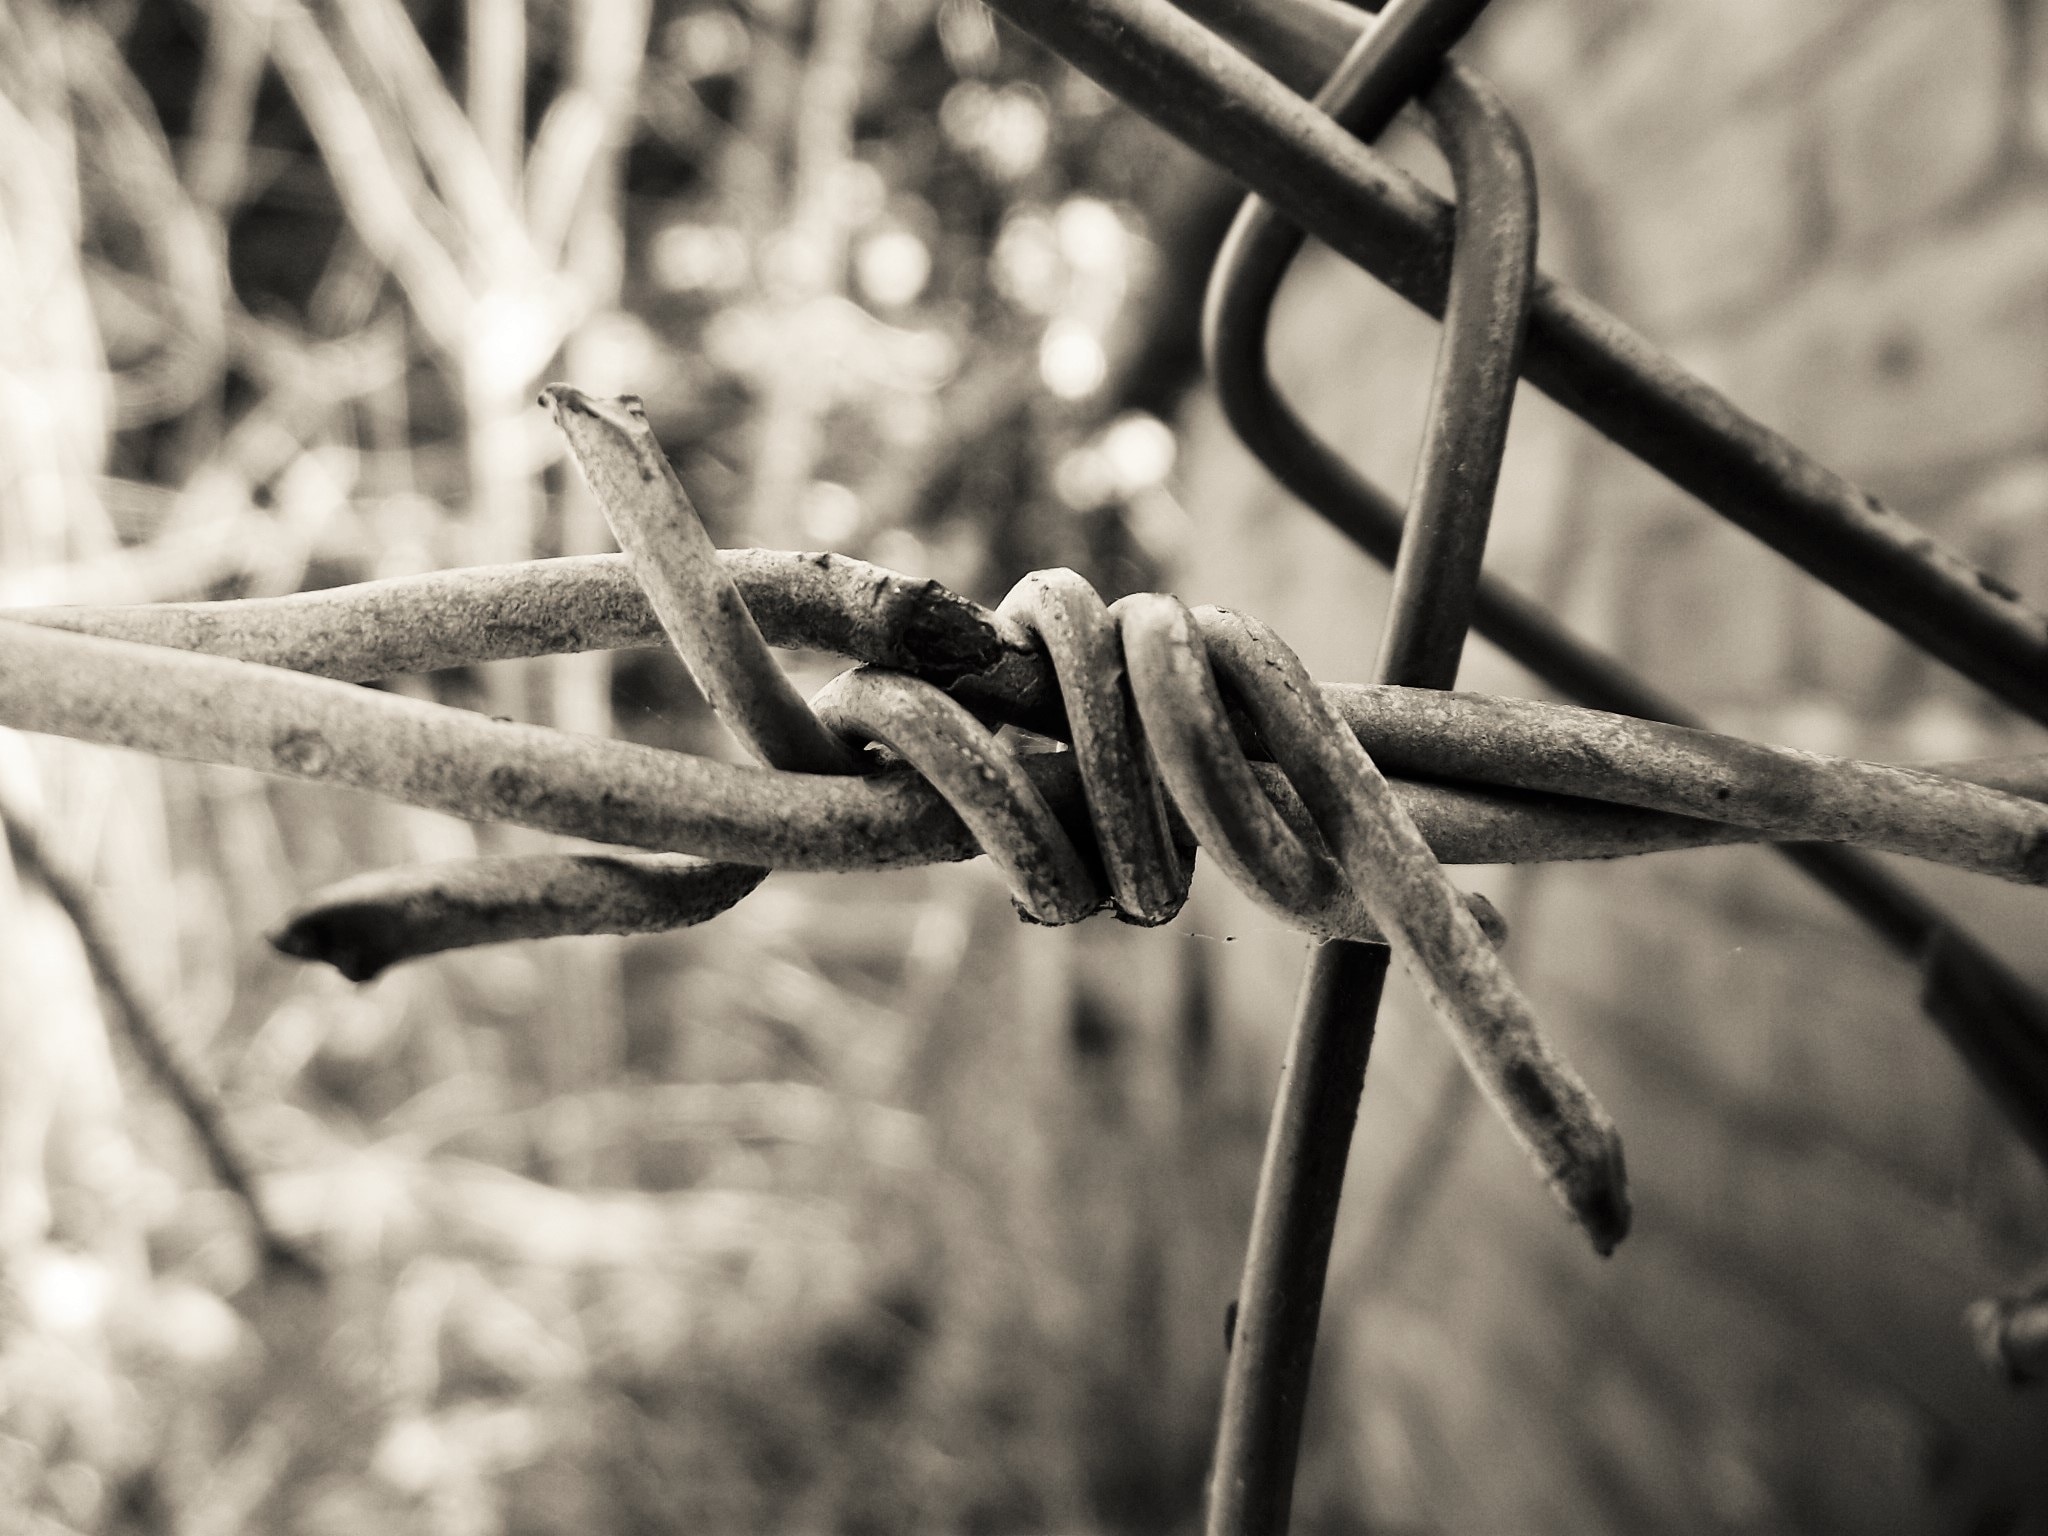 greyscale photo of barb wire